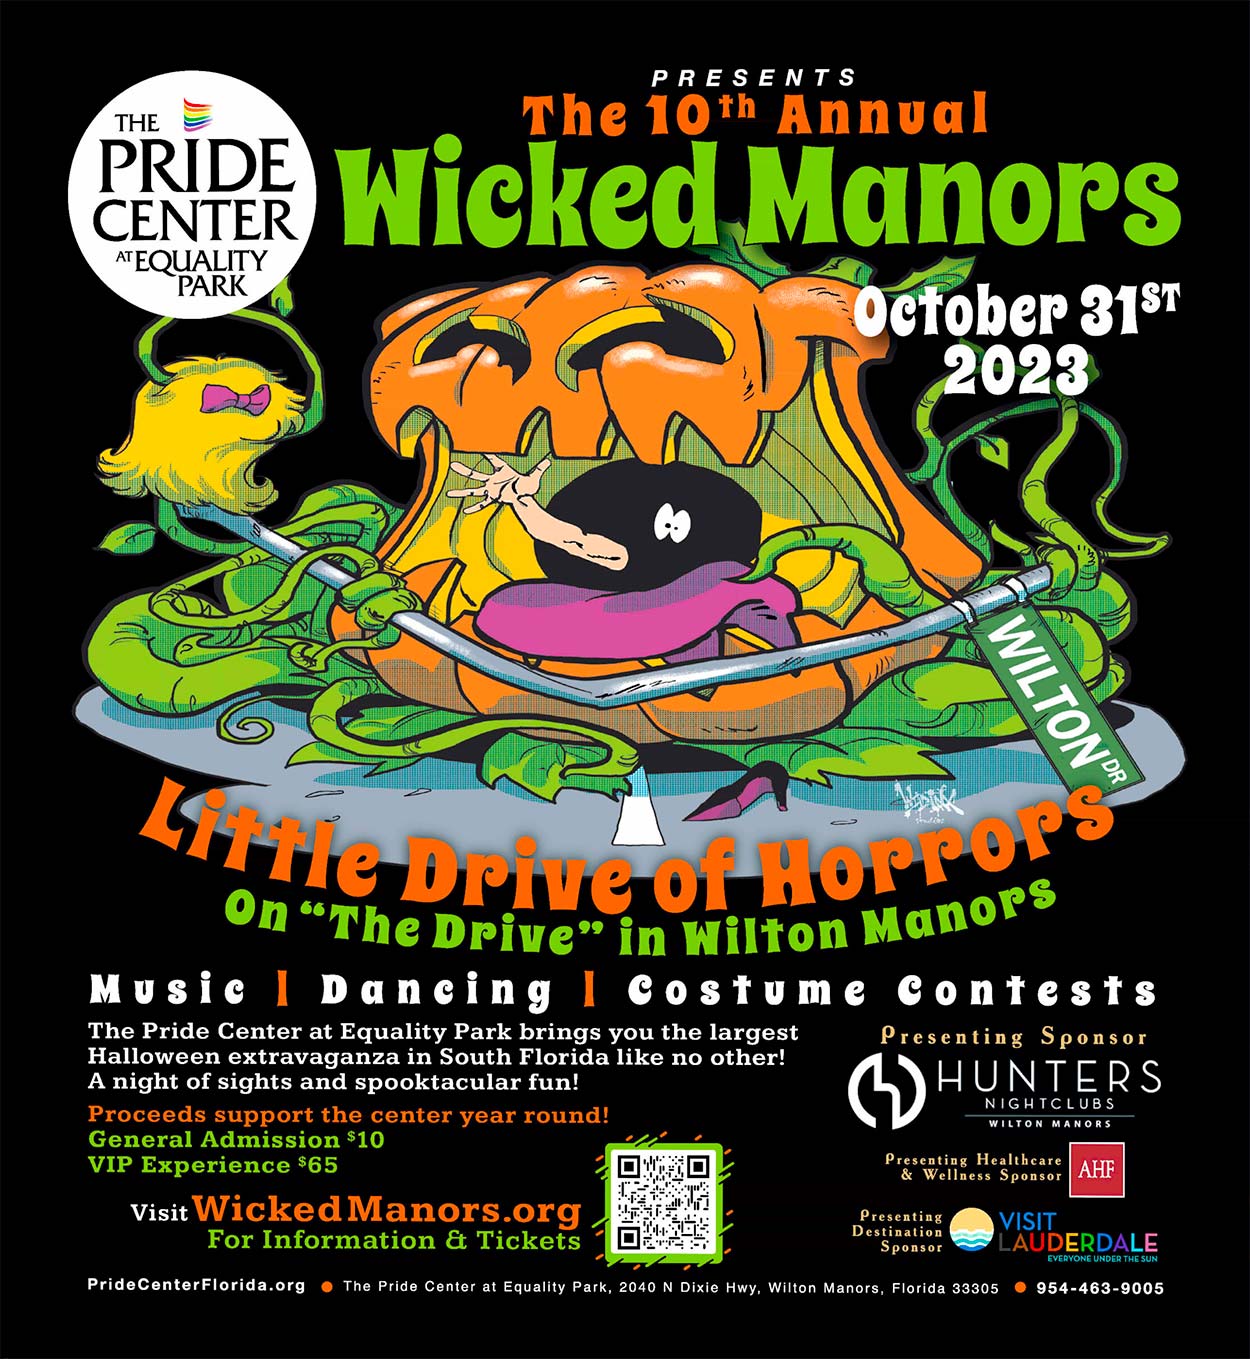 The 10th Annual Wicked Manors Little Drive of Horrors from The Pride Center at Equality Park